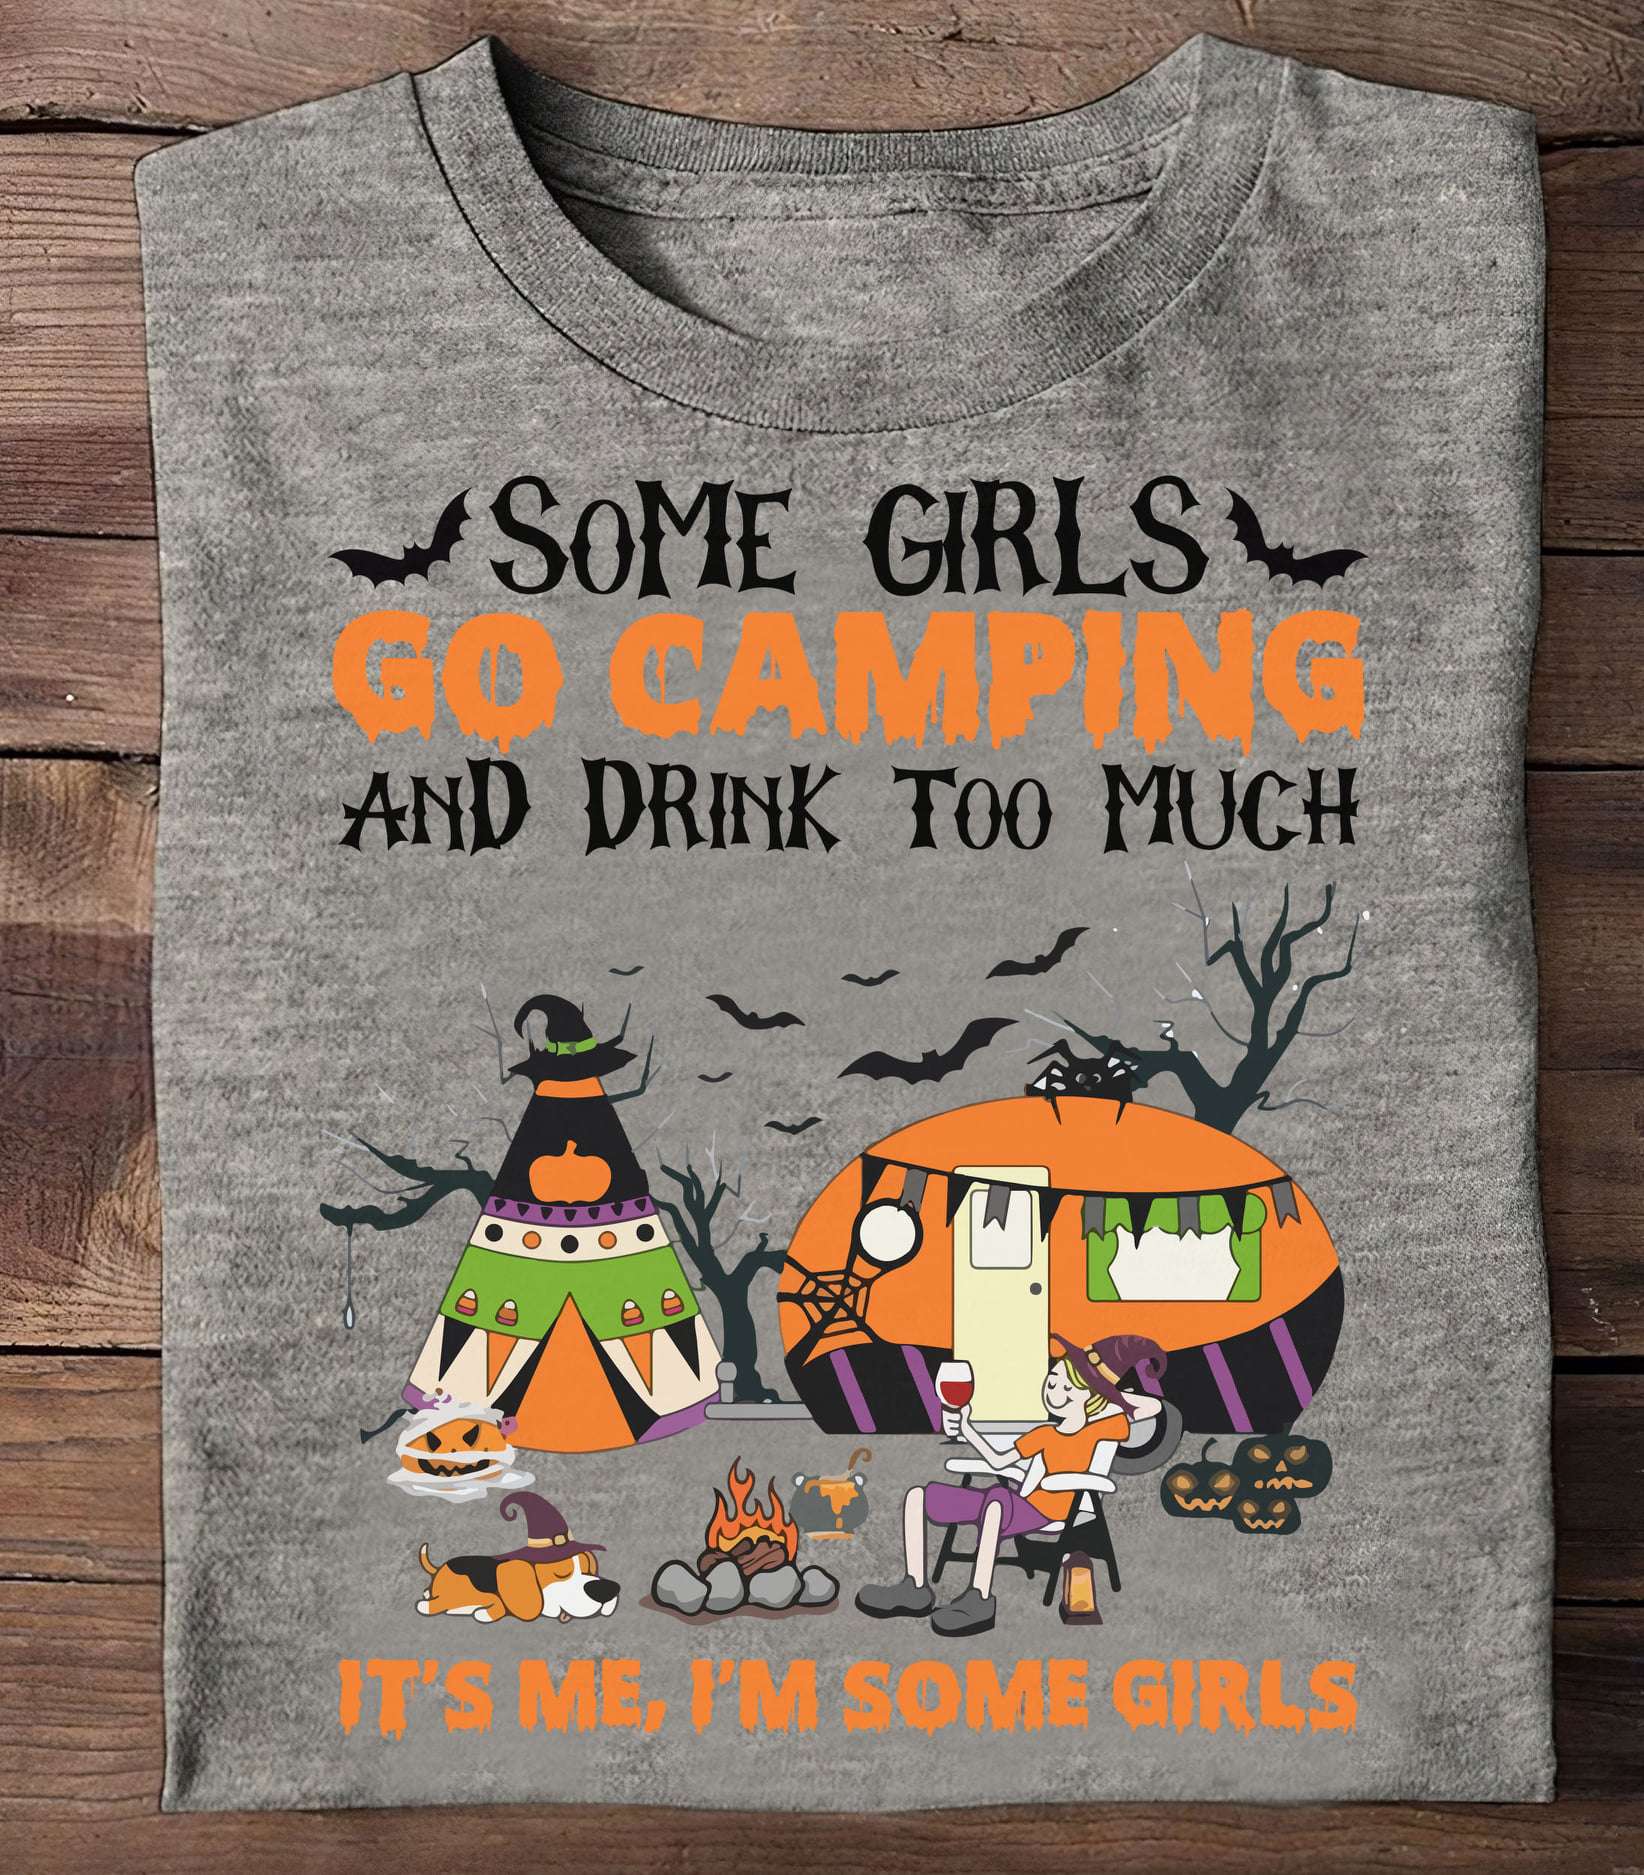 Some girls go camping and drink too much - Drinking and camping kinda girl, girl and beagle dog